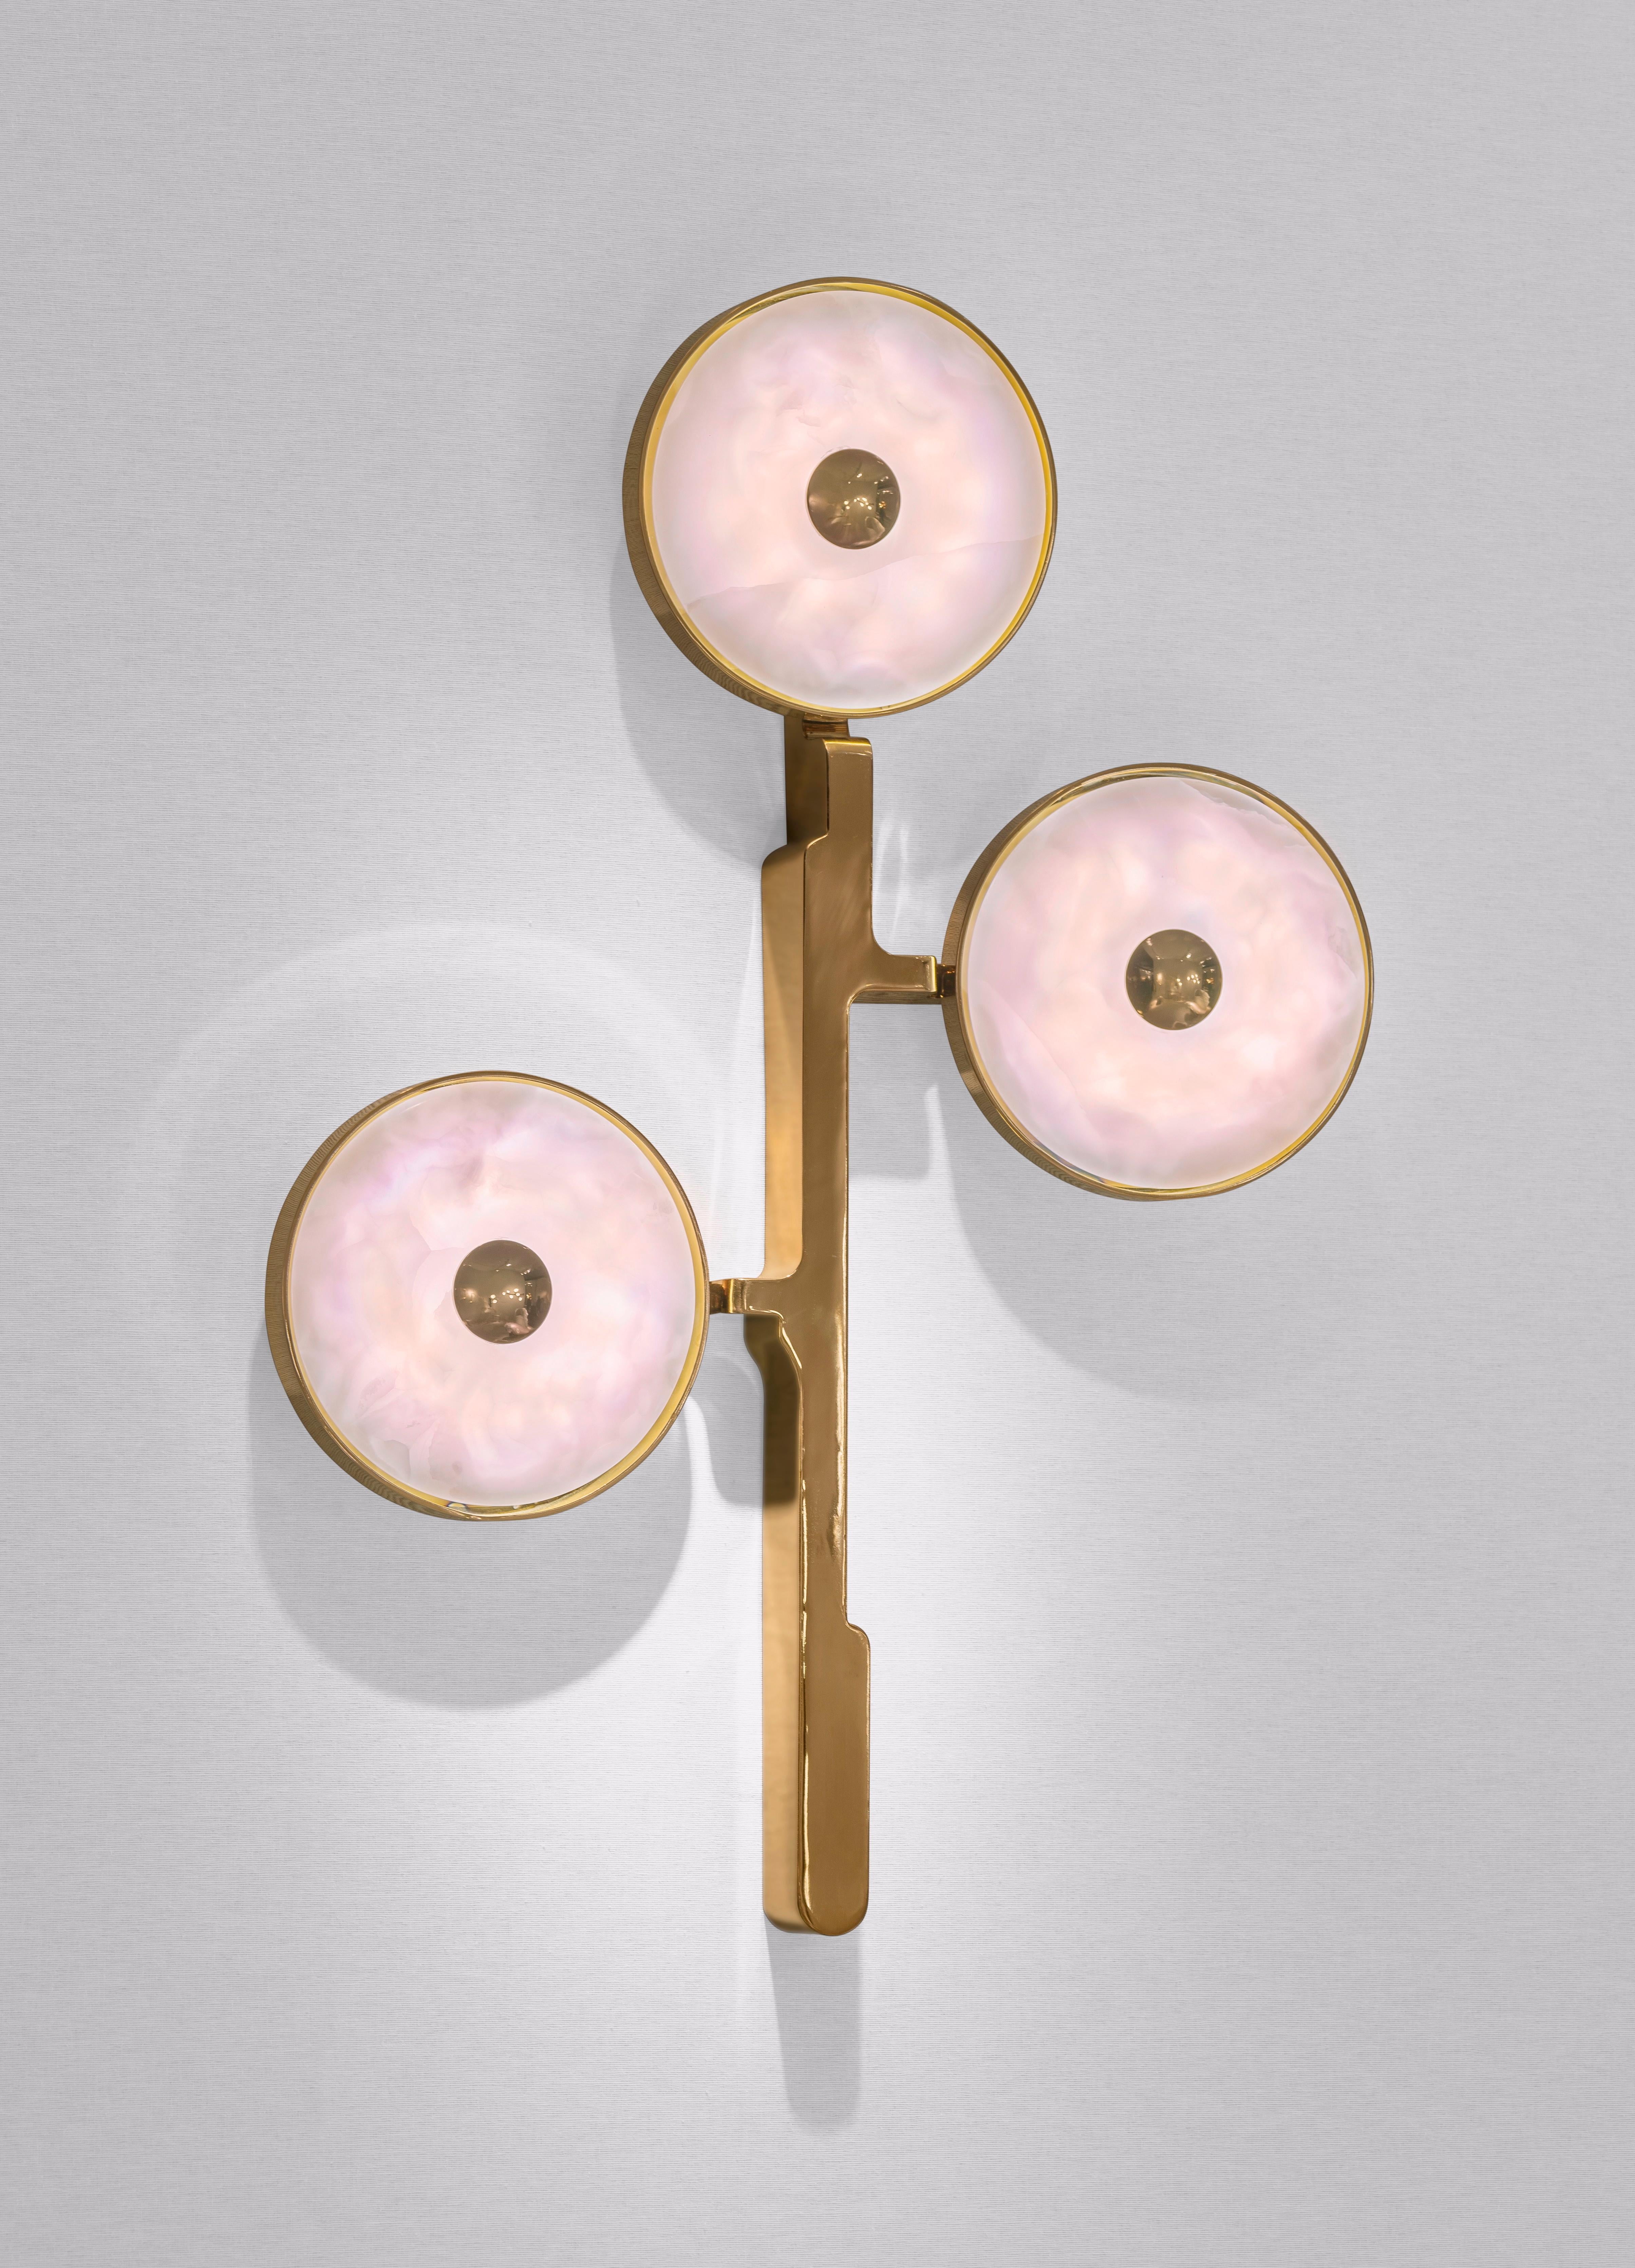 The 'JinShi Pink Jade' glamorous sconce by acclaimed design duo Studio MVW is a true jewel for the home. Pricing is for a set of two. Each sconce encompasses three retro-lit heads in natural pink jade, an exceptional gemstone with a sumptuous powder